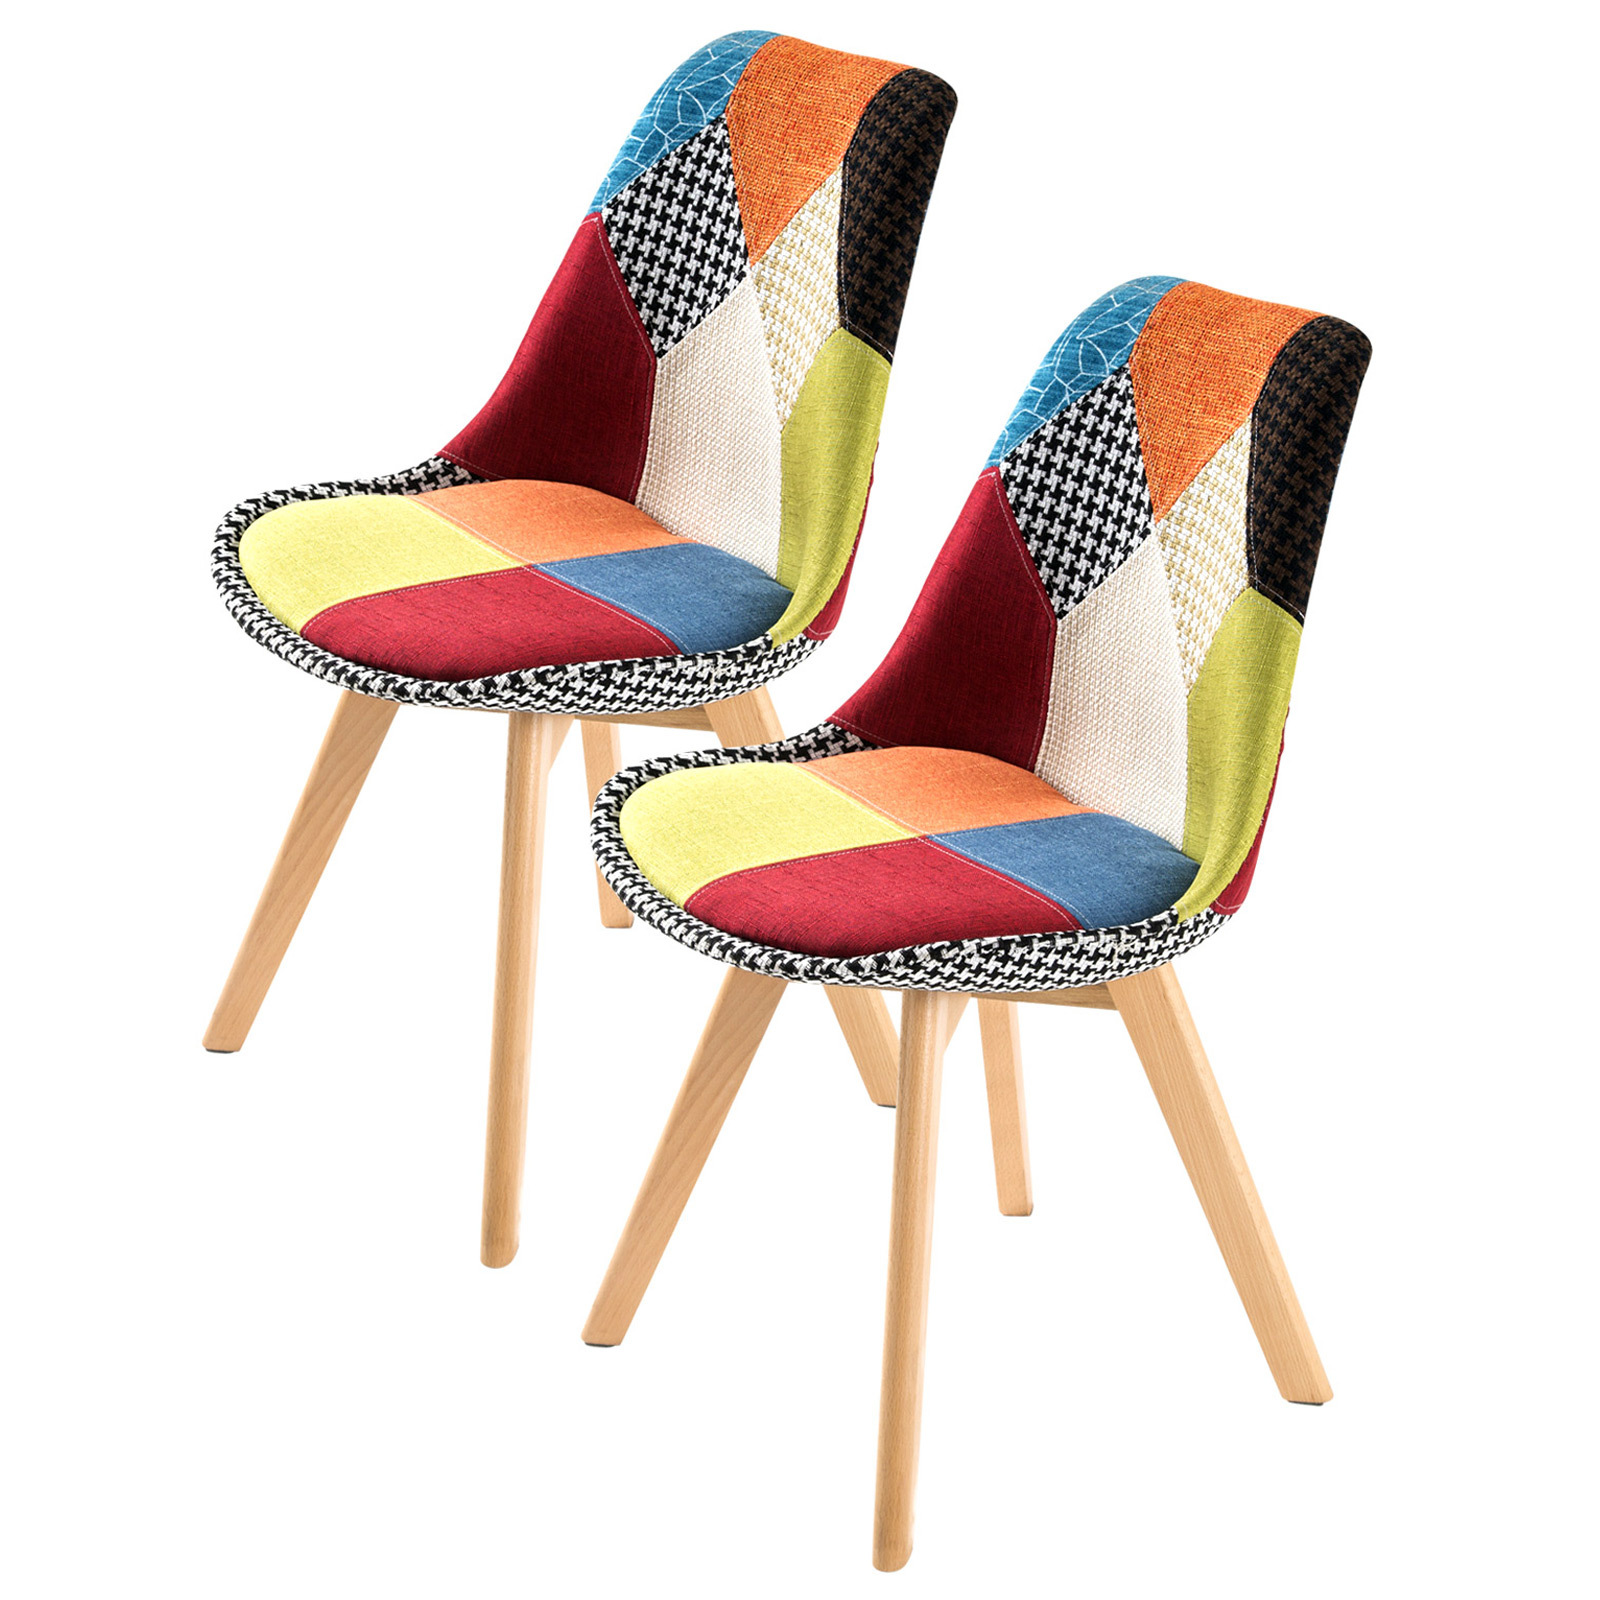 2X Padded Seat Dining Chair Fabric - MULTI